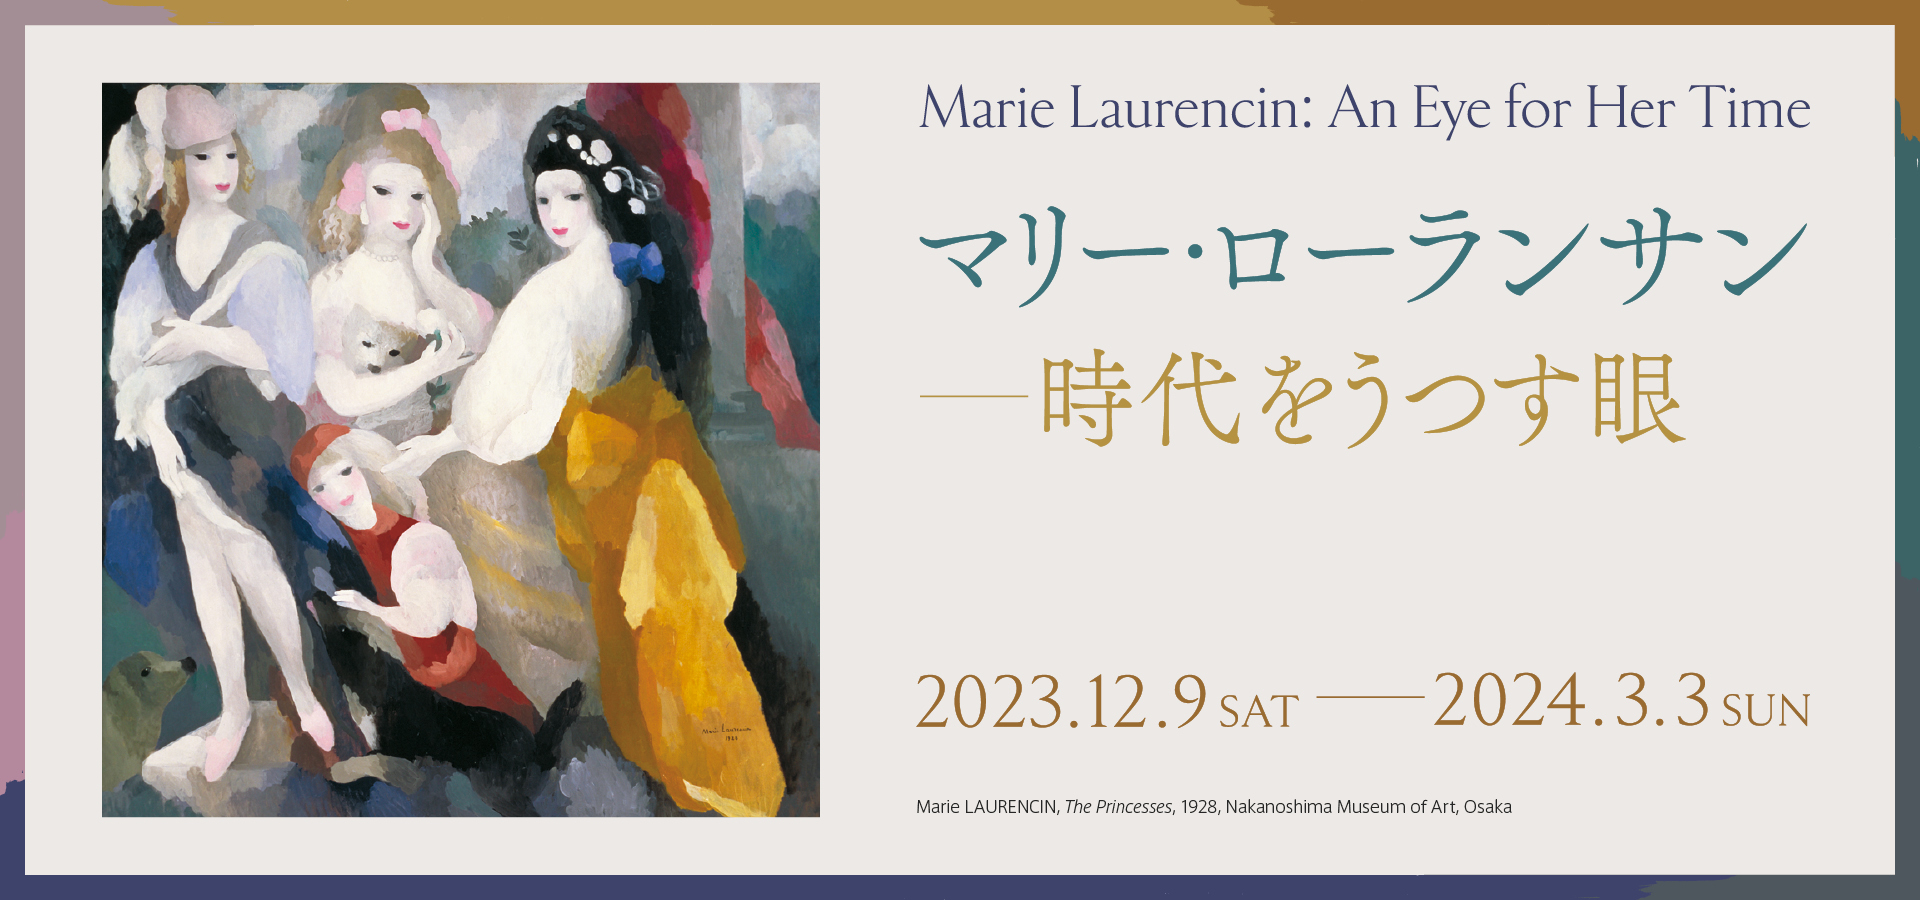 Marie Laurencin: An Eye for Her Time